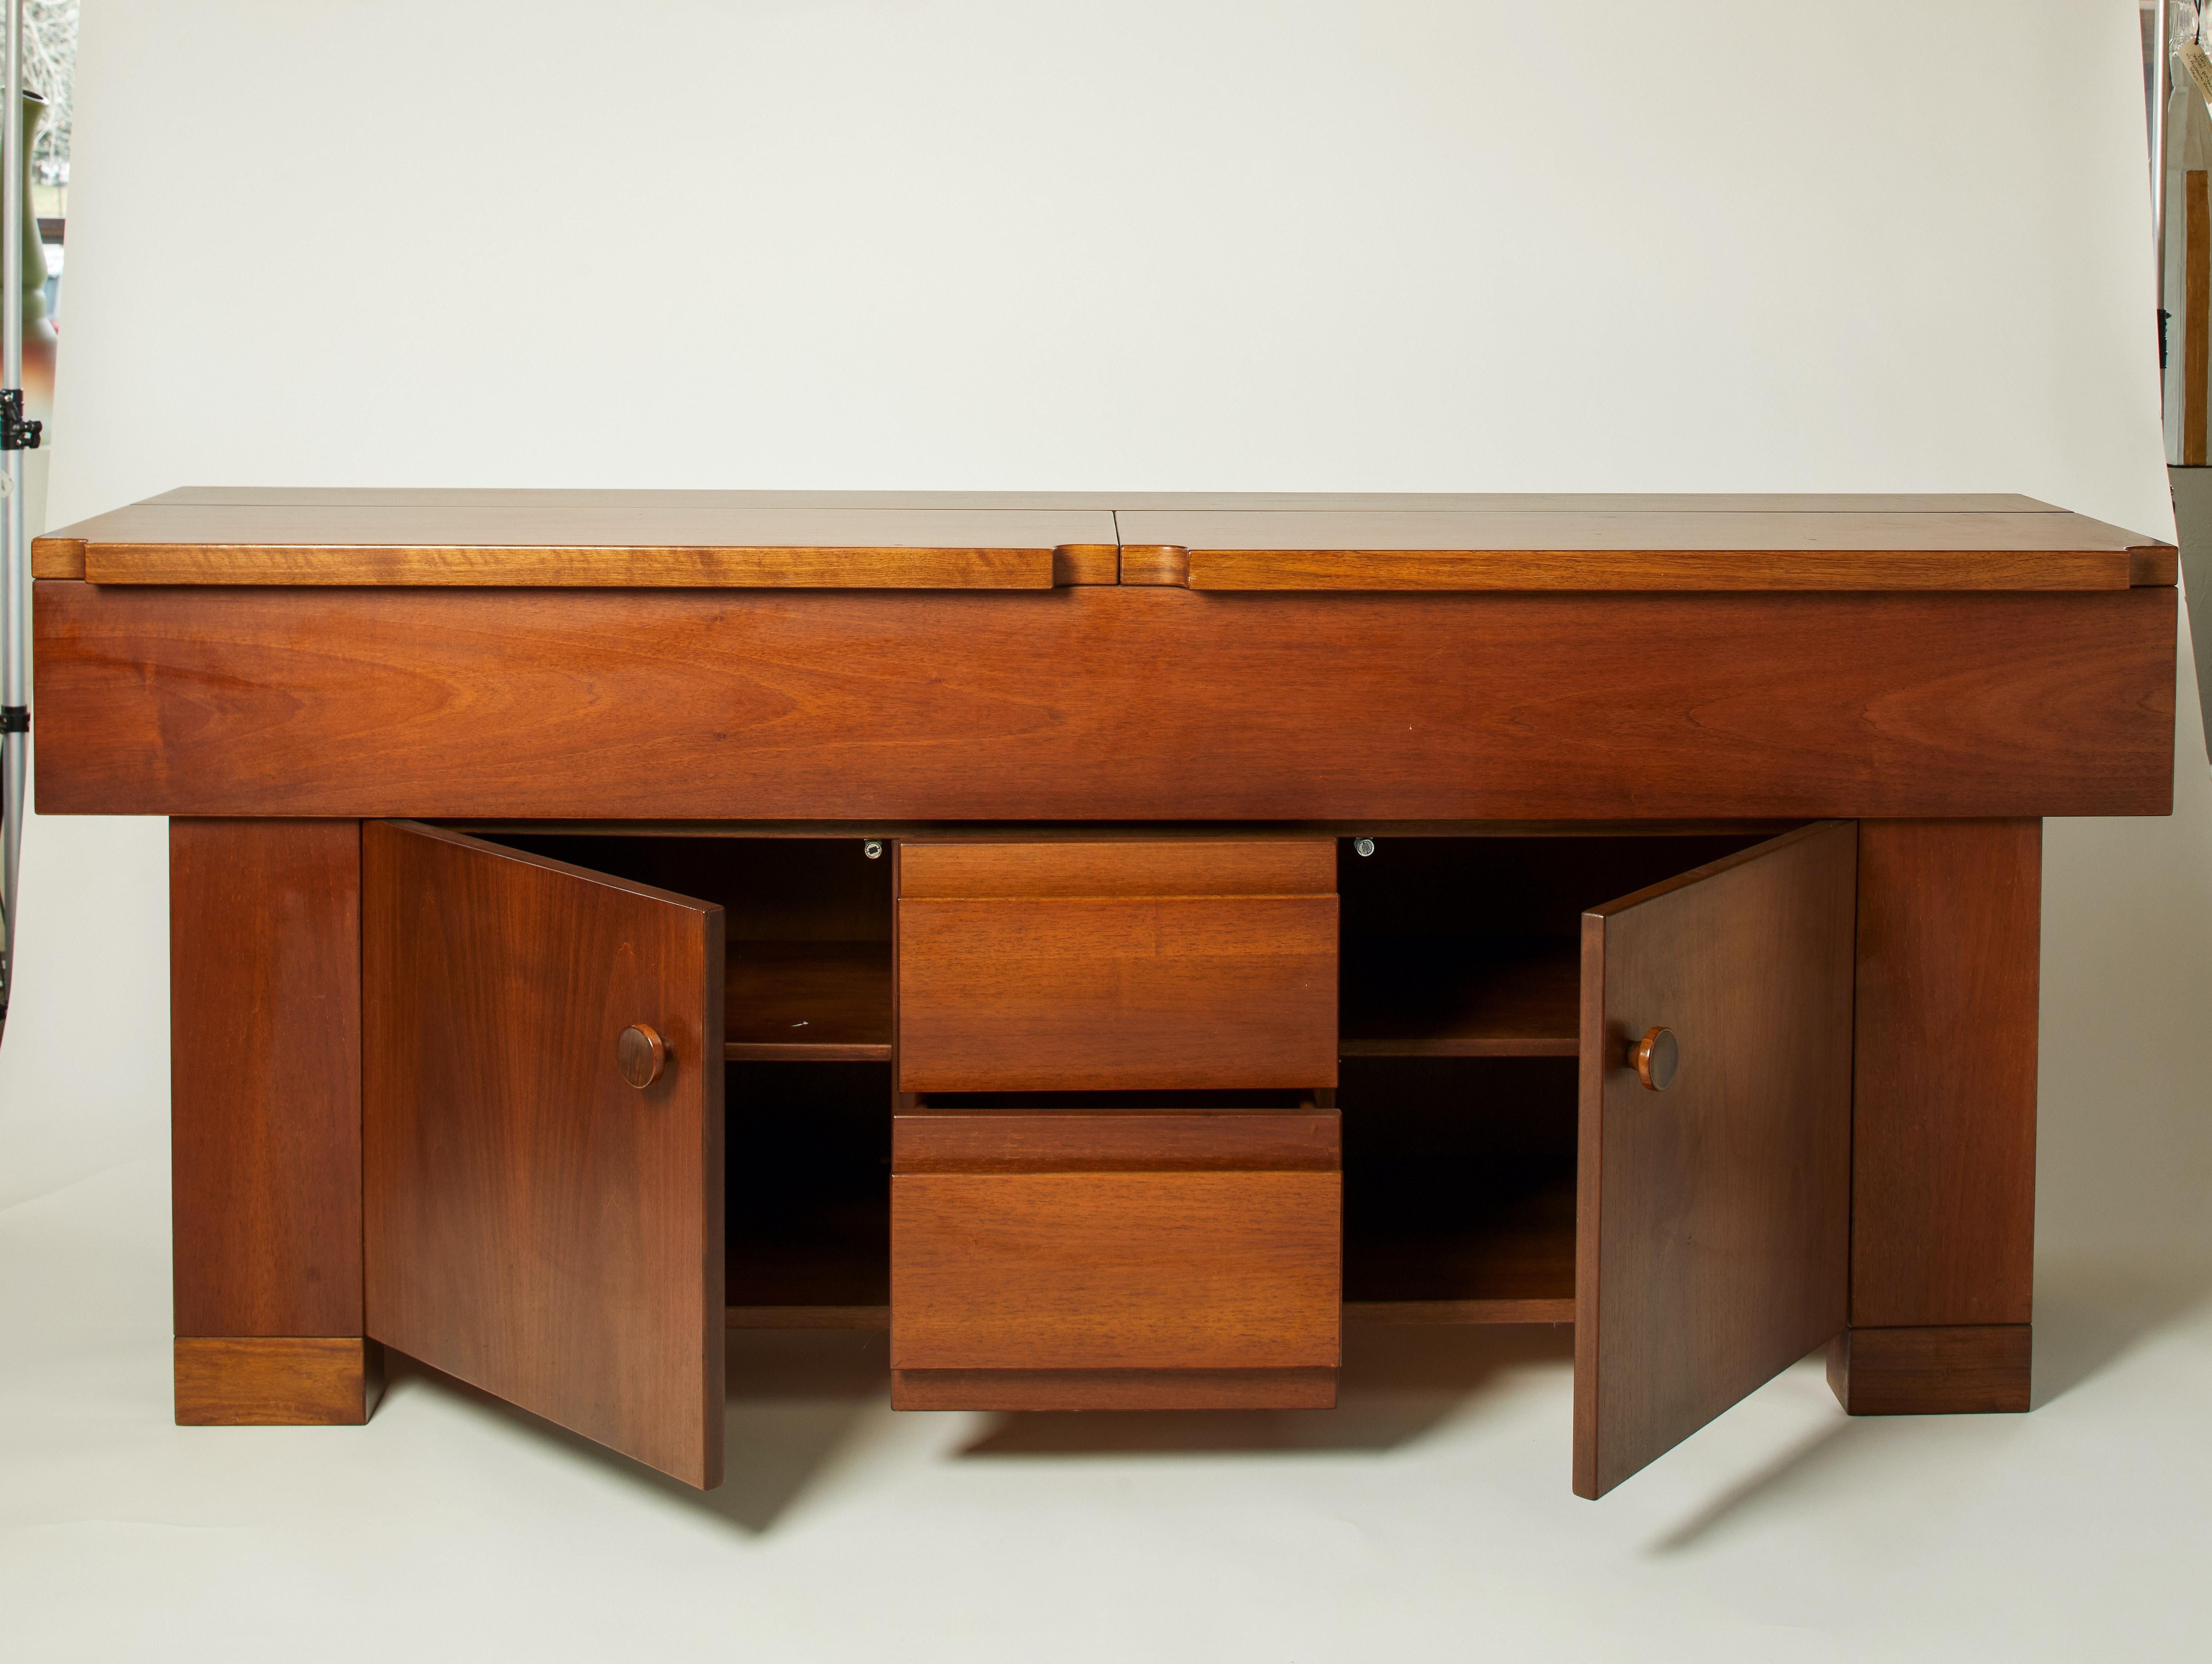 1980s Italian walnut buffet featuring a multitude of shelves and drawers.